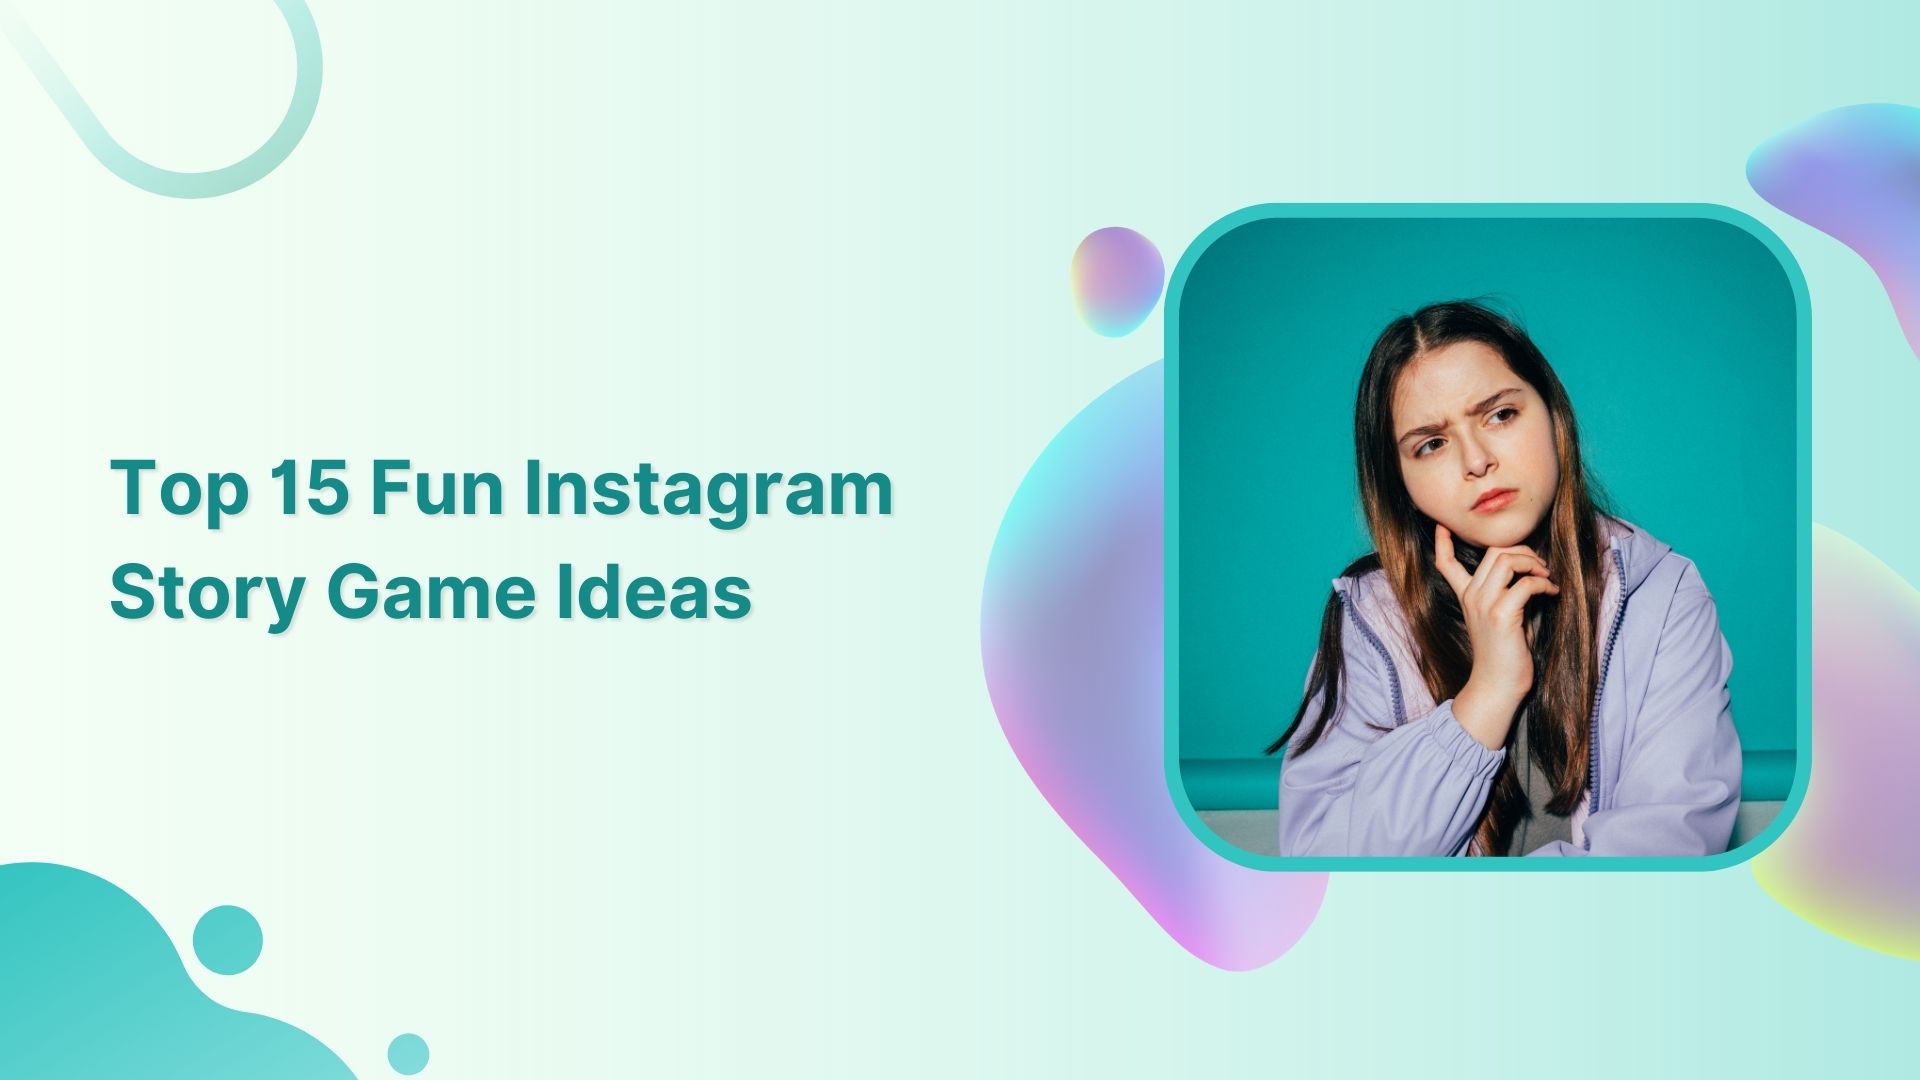 Top 15 Ideas for Fun Instagram Story Games